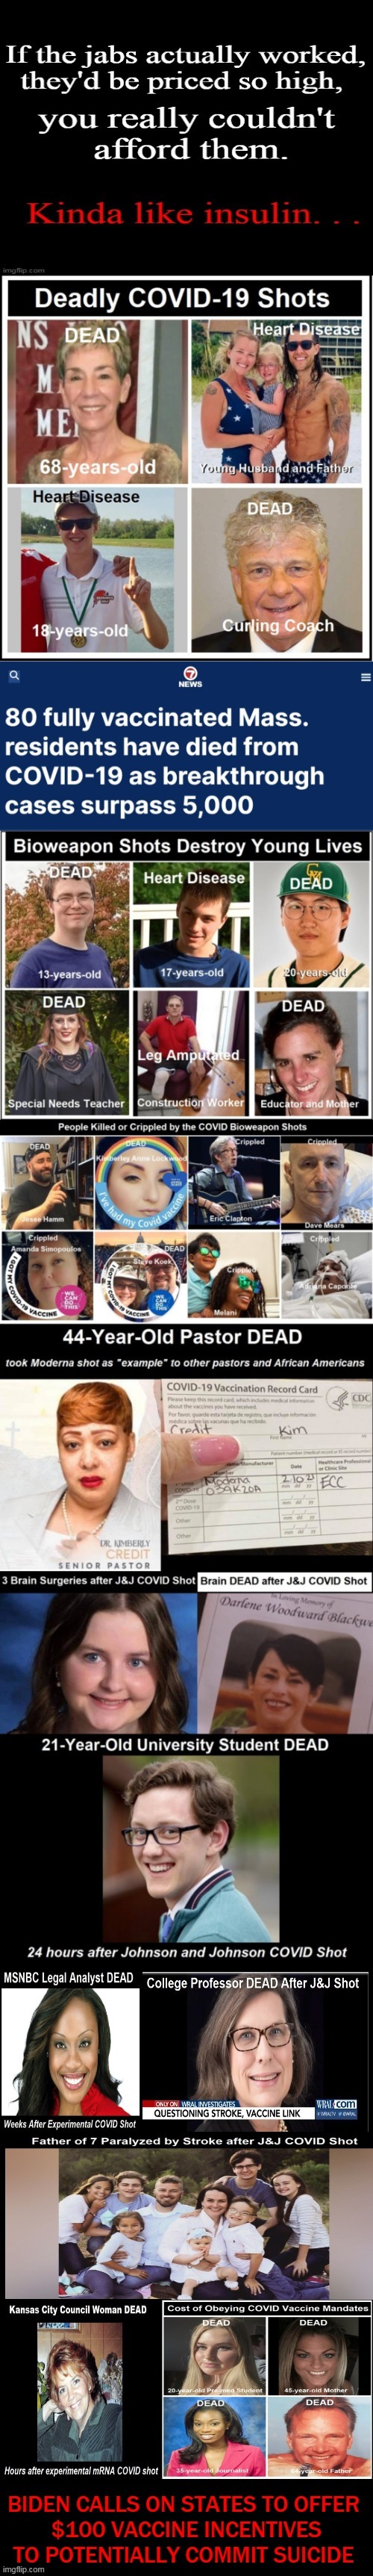 Reports of Serious Injuries After Vaccines Surge as CDC Says Vaccinated May Be as Likely to Spread COVID as Unvaxxed | image tagged in politics,covid vaccine,experiment,death,consequences,heartbreaking | made w/ Imgflip meme maker